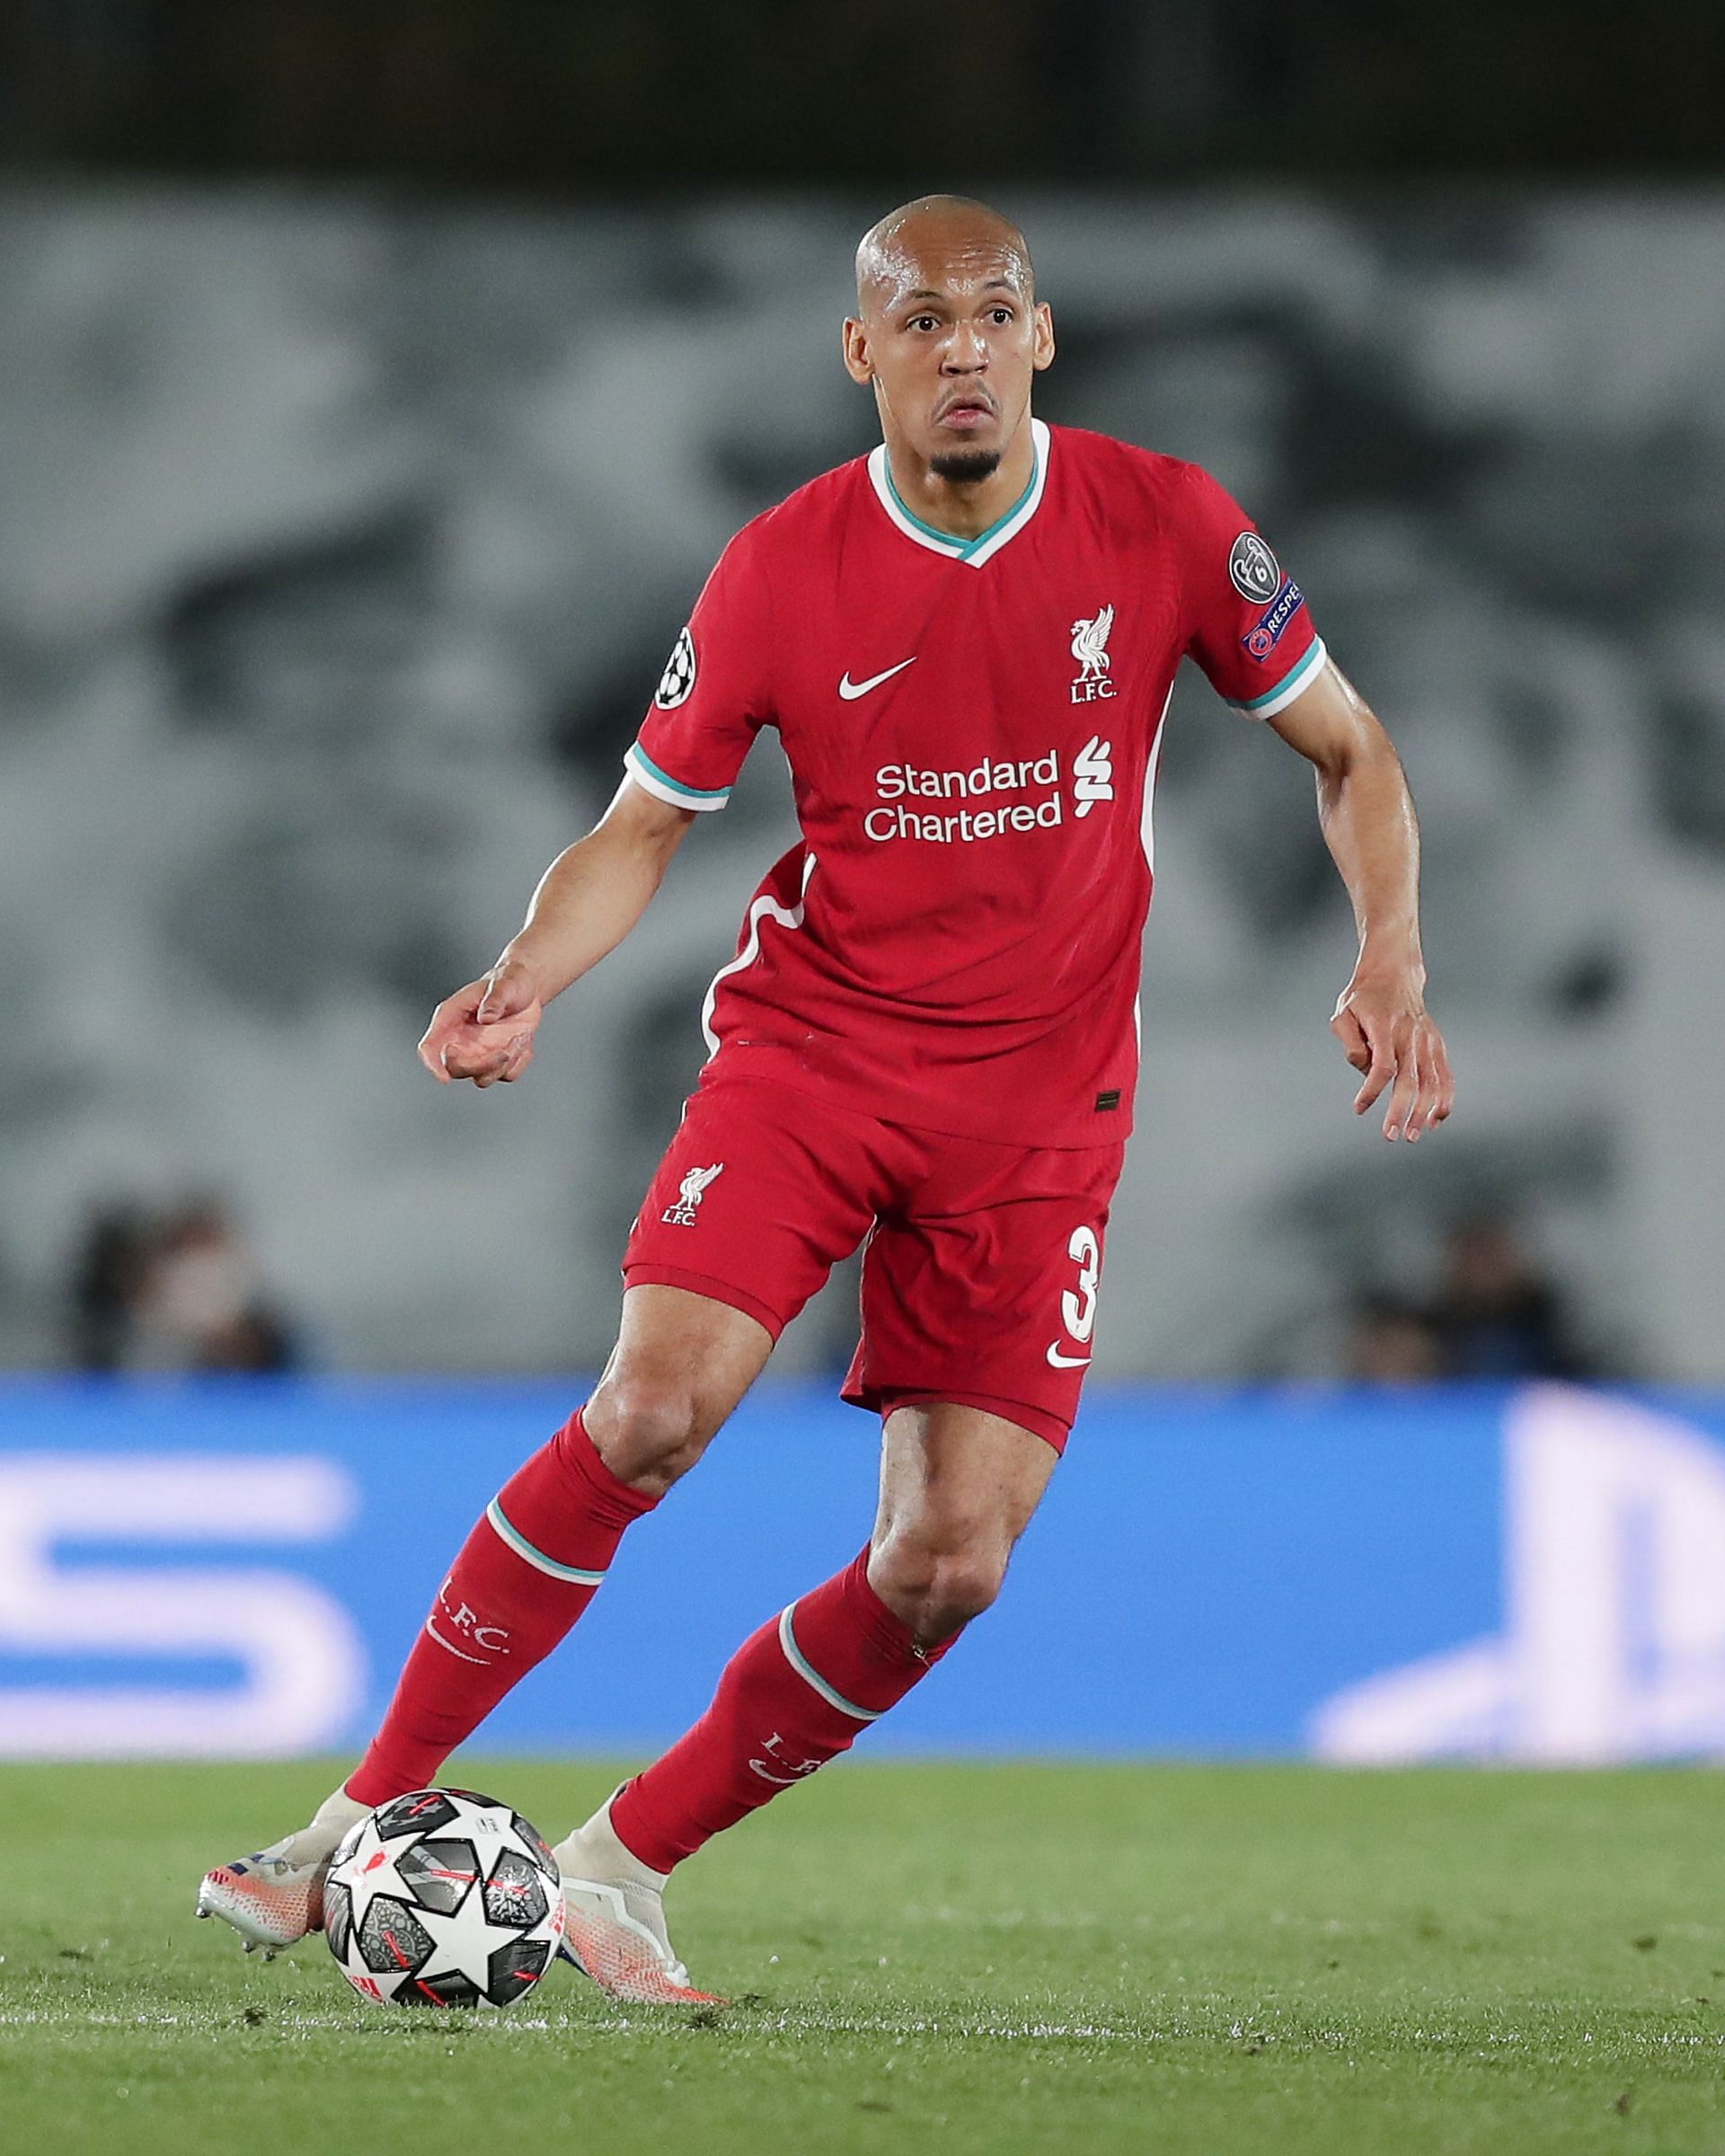 Fabinho hit a purple patch as he scored his fifth goal becoming the lead goal scorer of the Reds in 2022.